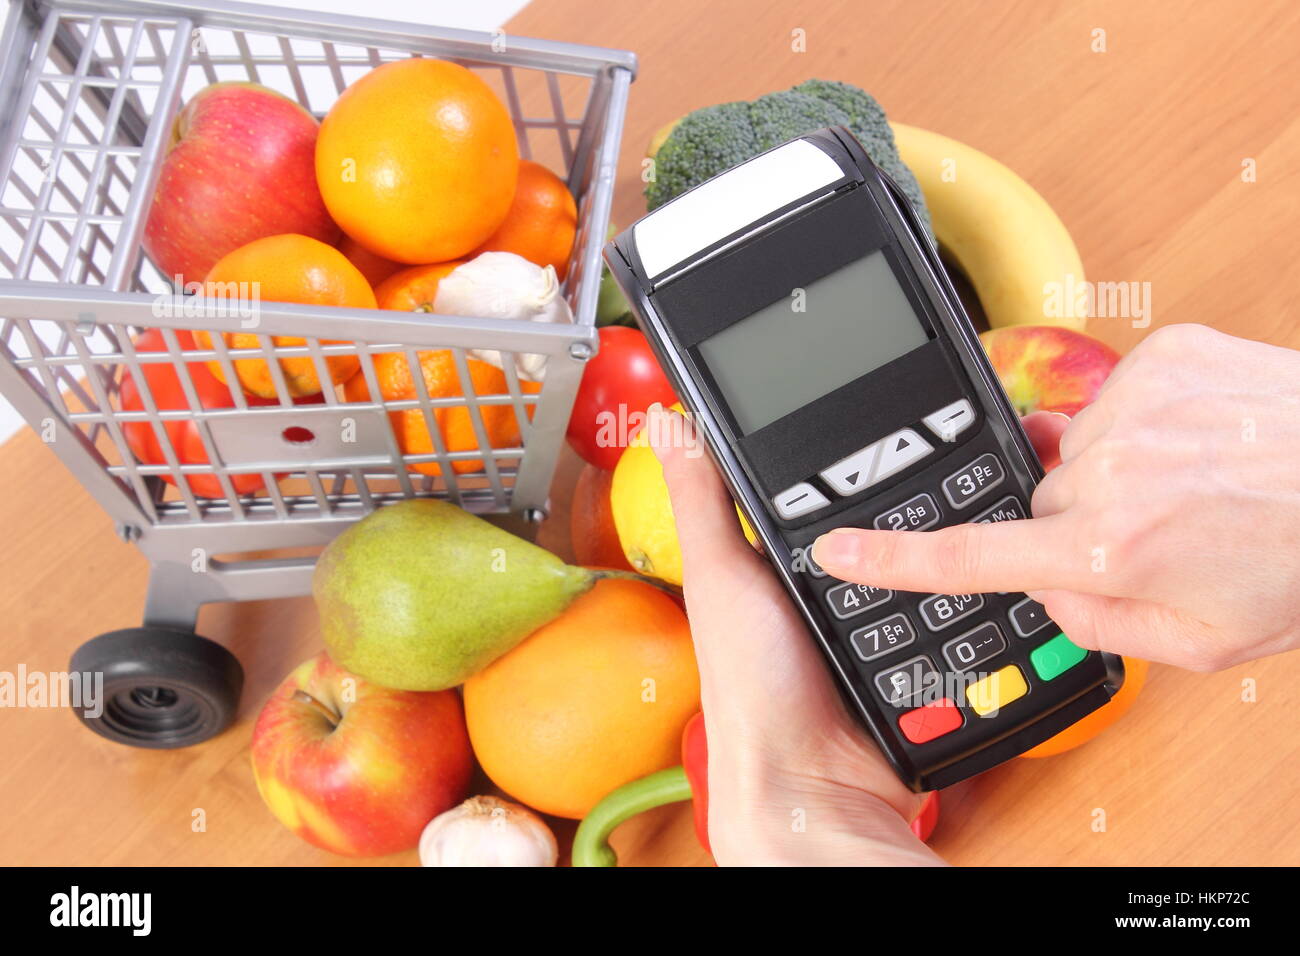 Hand using payment terminal, enter personal identification number, credit card reader and fresh fruits and vegetables with plastic shopping carts, Stock Photo